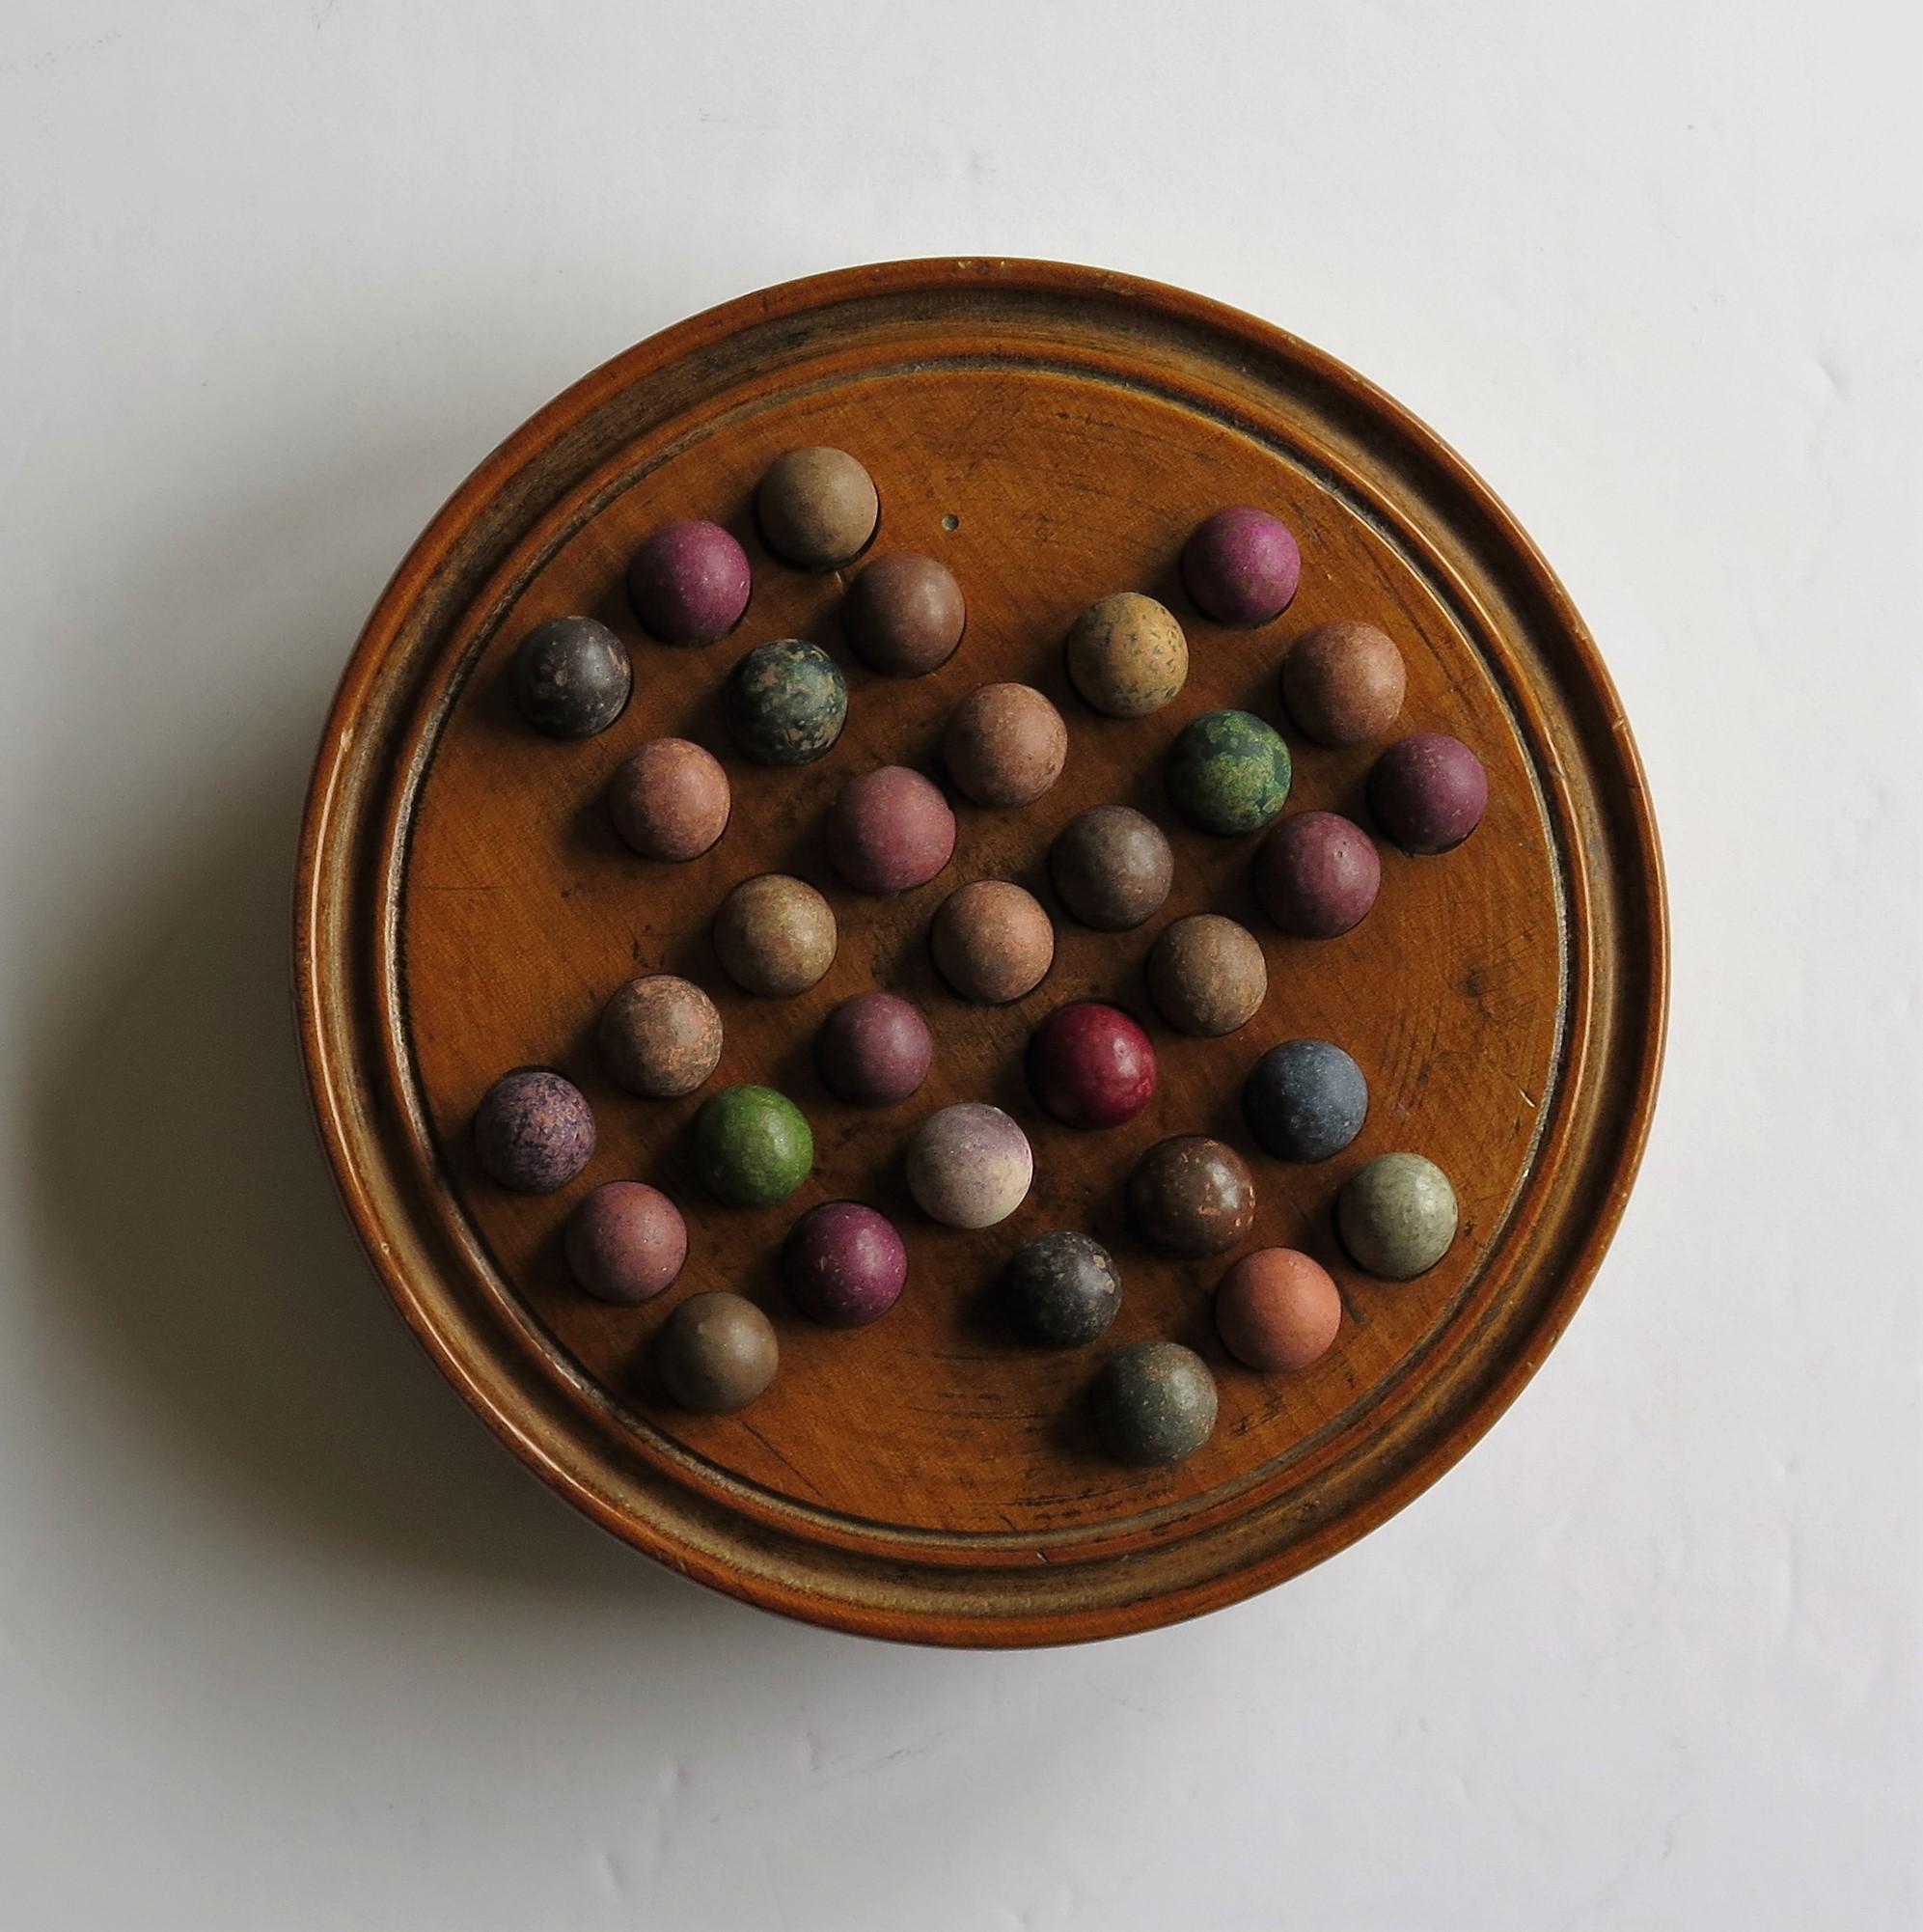 Victorian 19th Century Travelling Marble Solitaire Game with 33 Handmade Clay Marbles